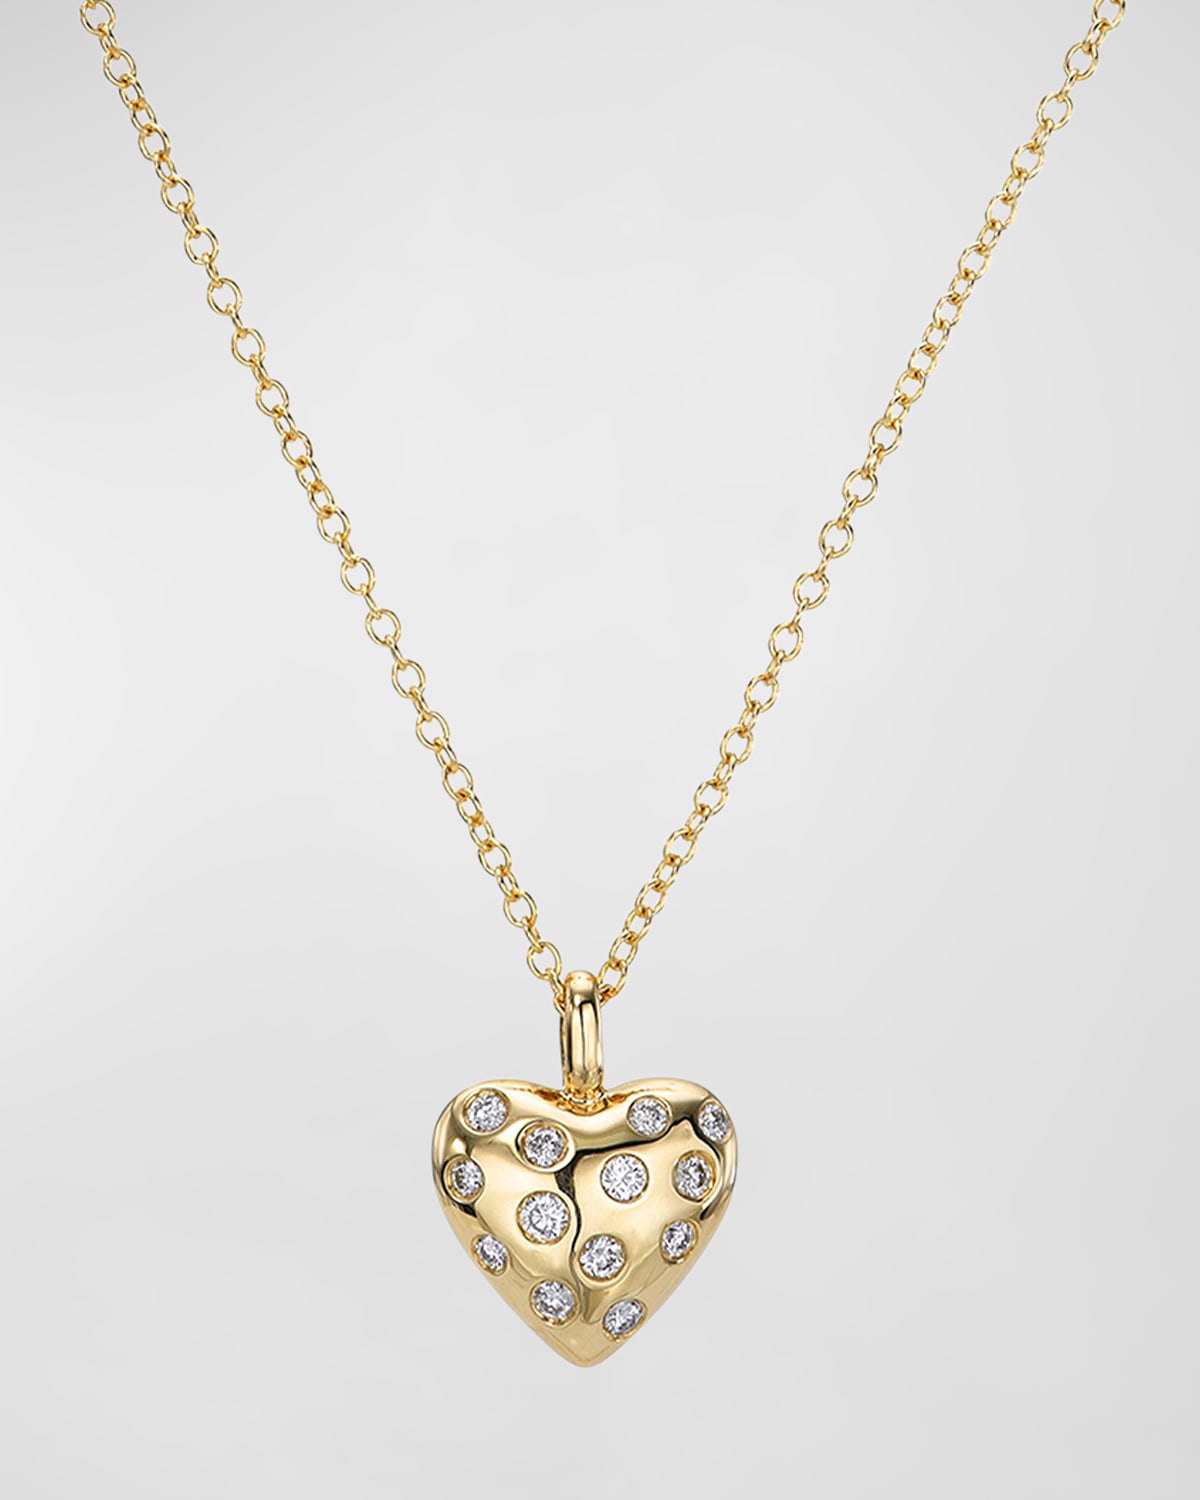 14K Gold and Diamond Domed Heart Necklace